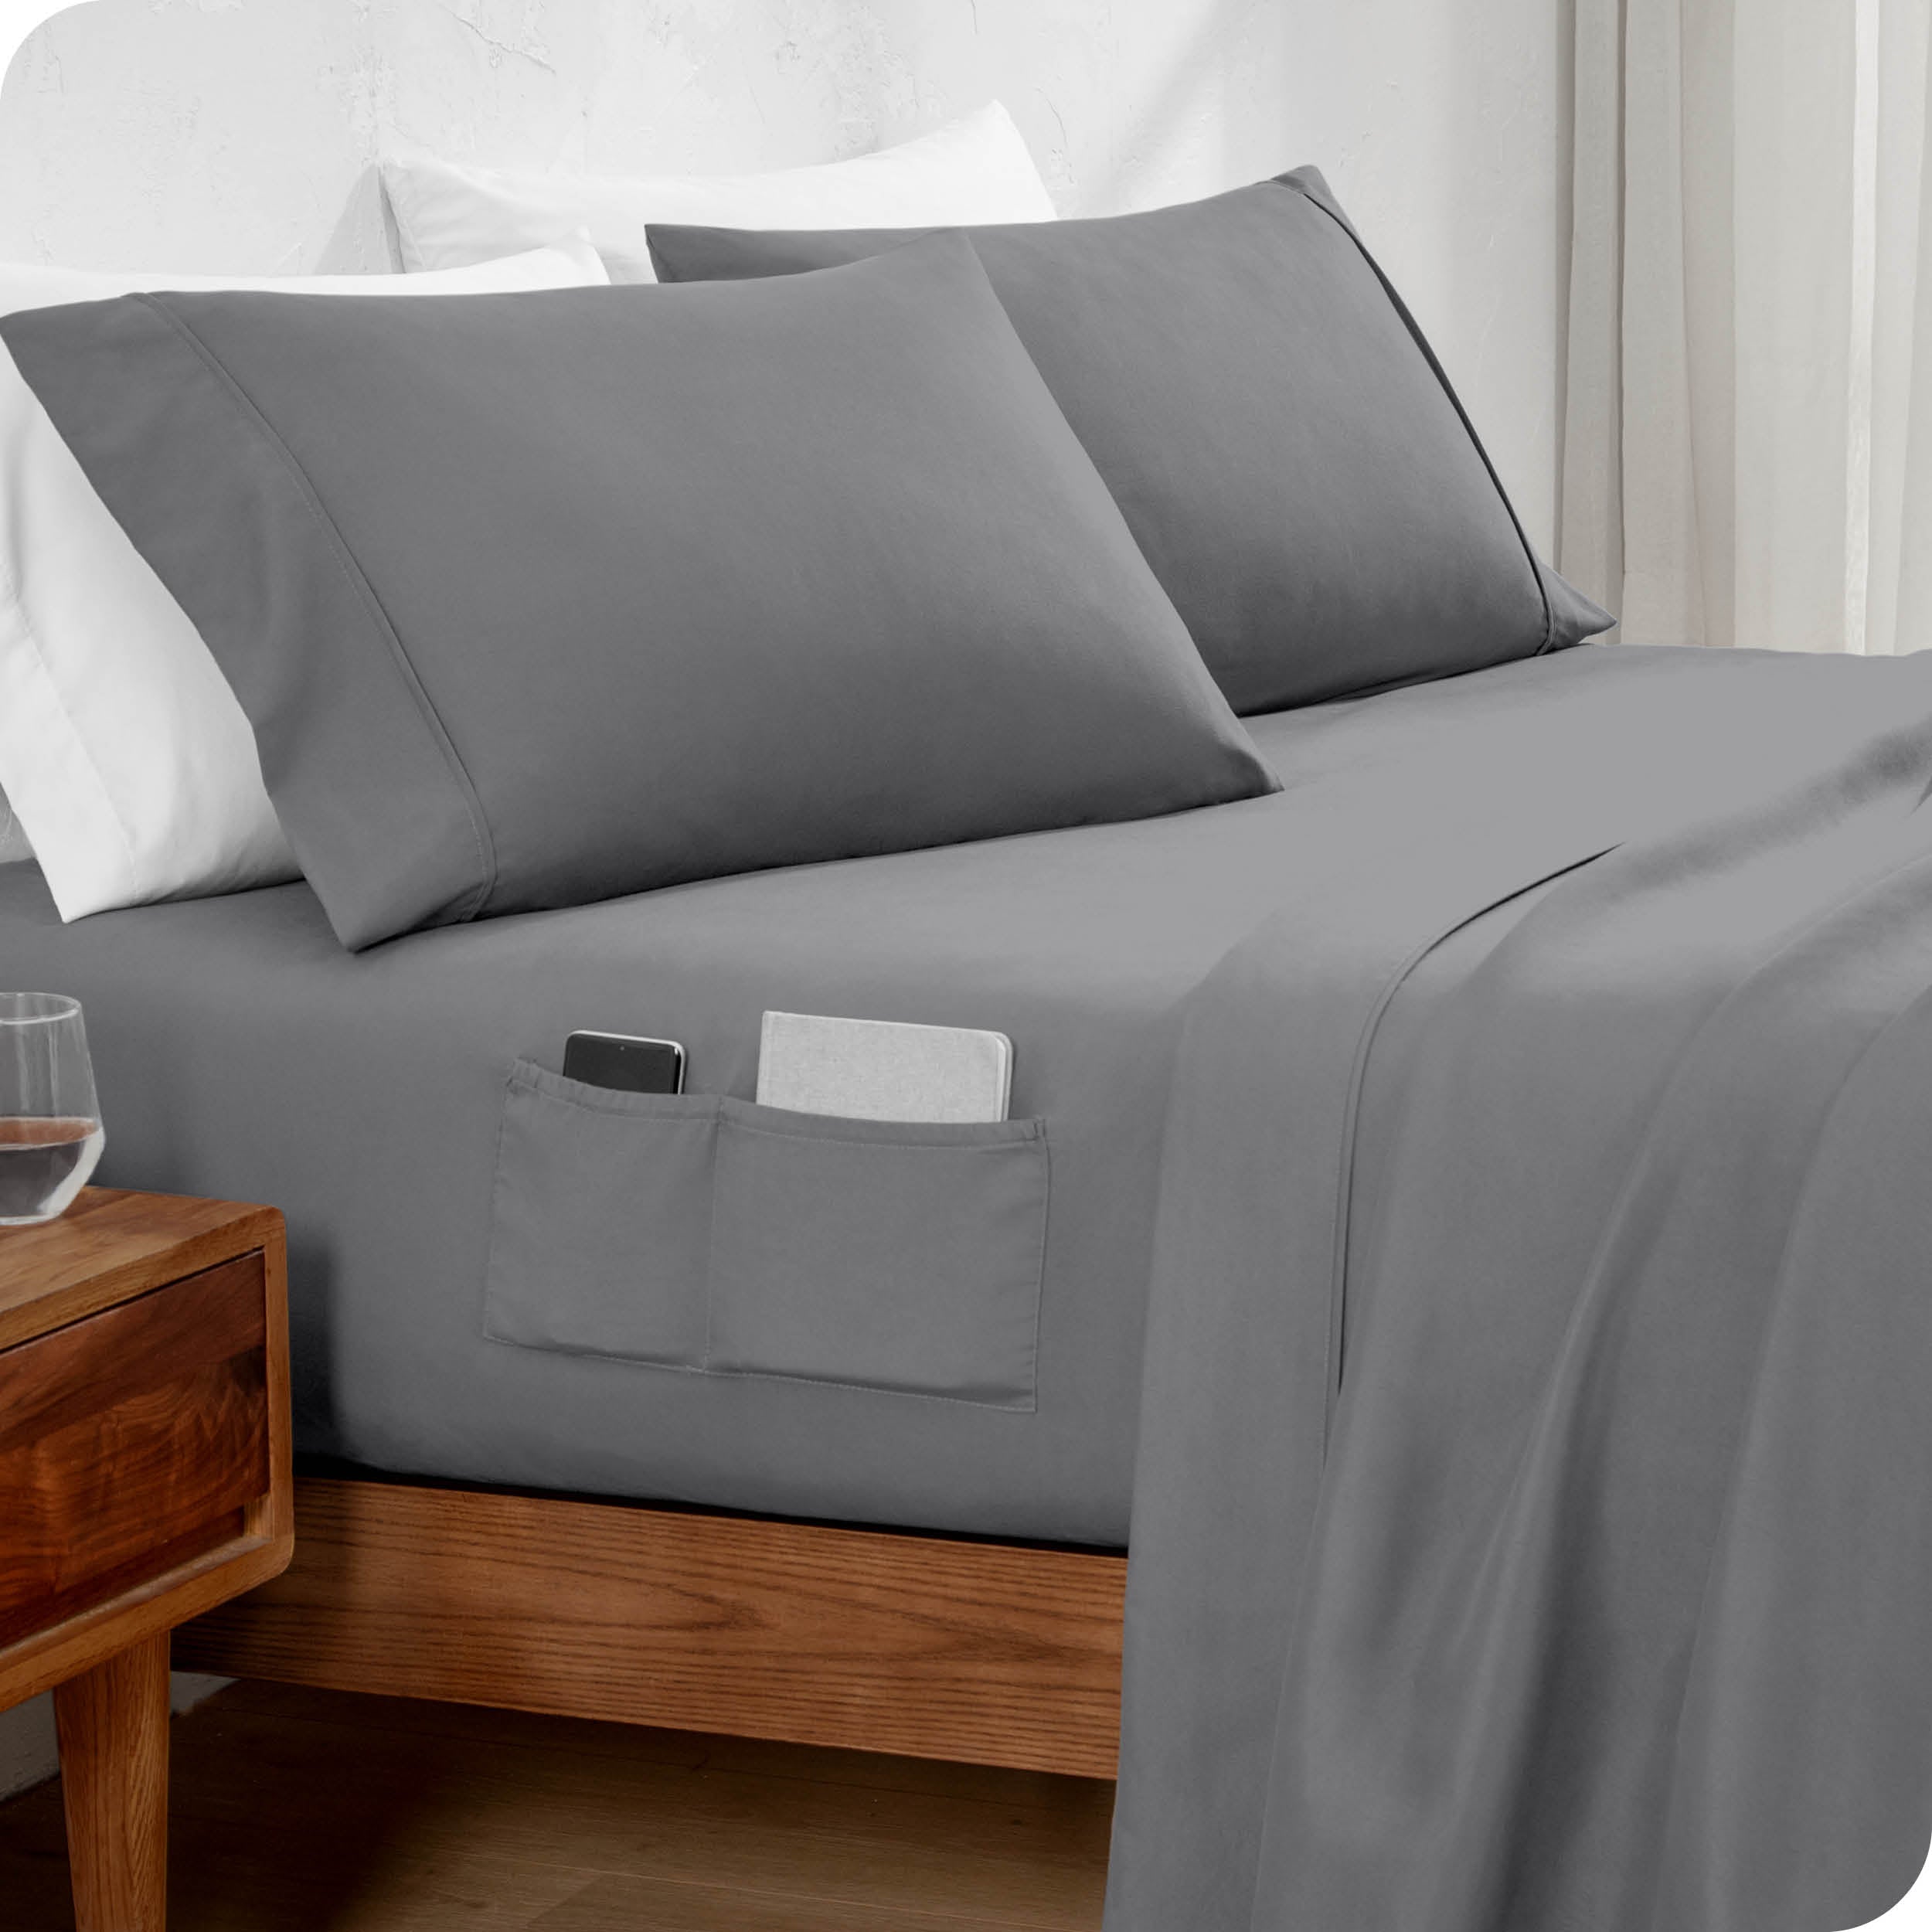 Bare Home Double Brushed Sheet Set, Full XL - Navy